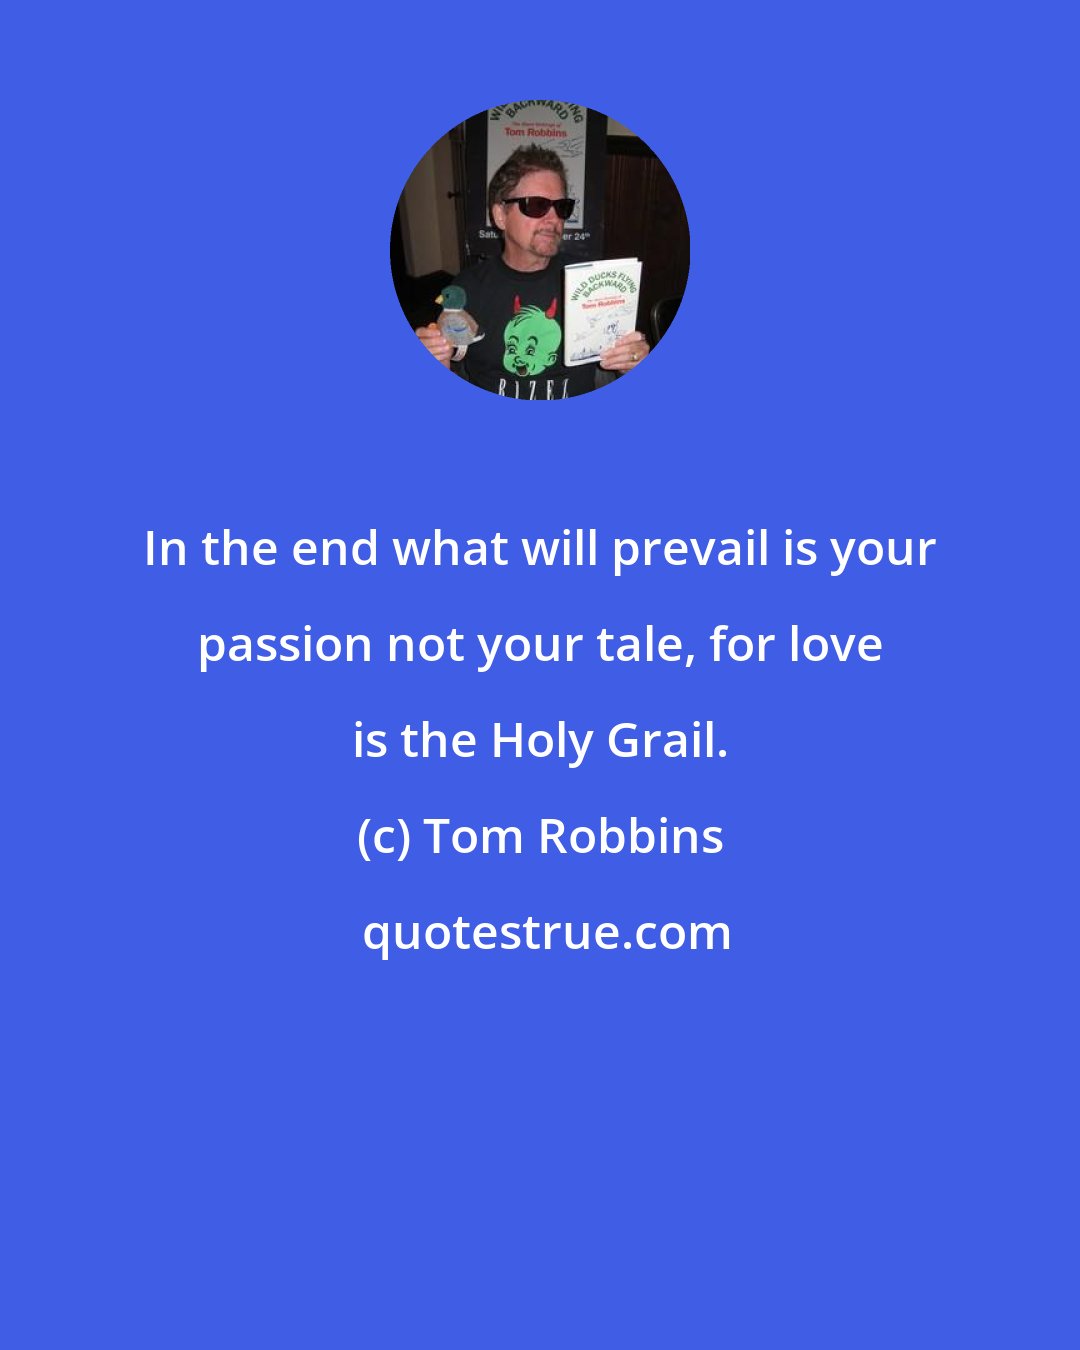 Tom Robbins: In the end what will prevail is your passion not your tale, for love is the Holy Grail.